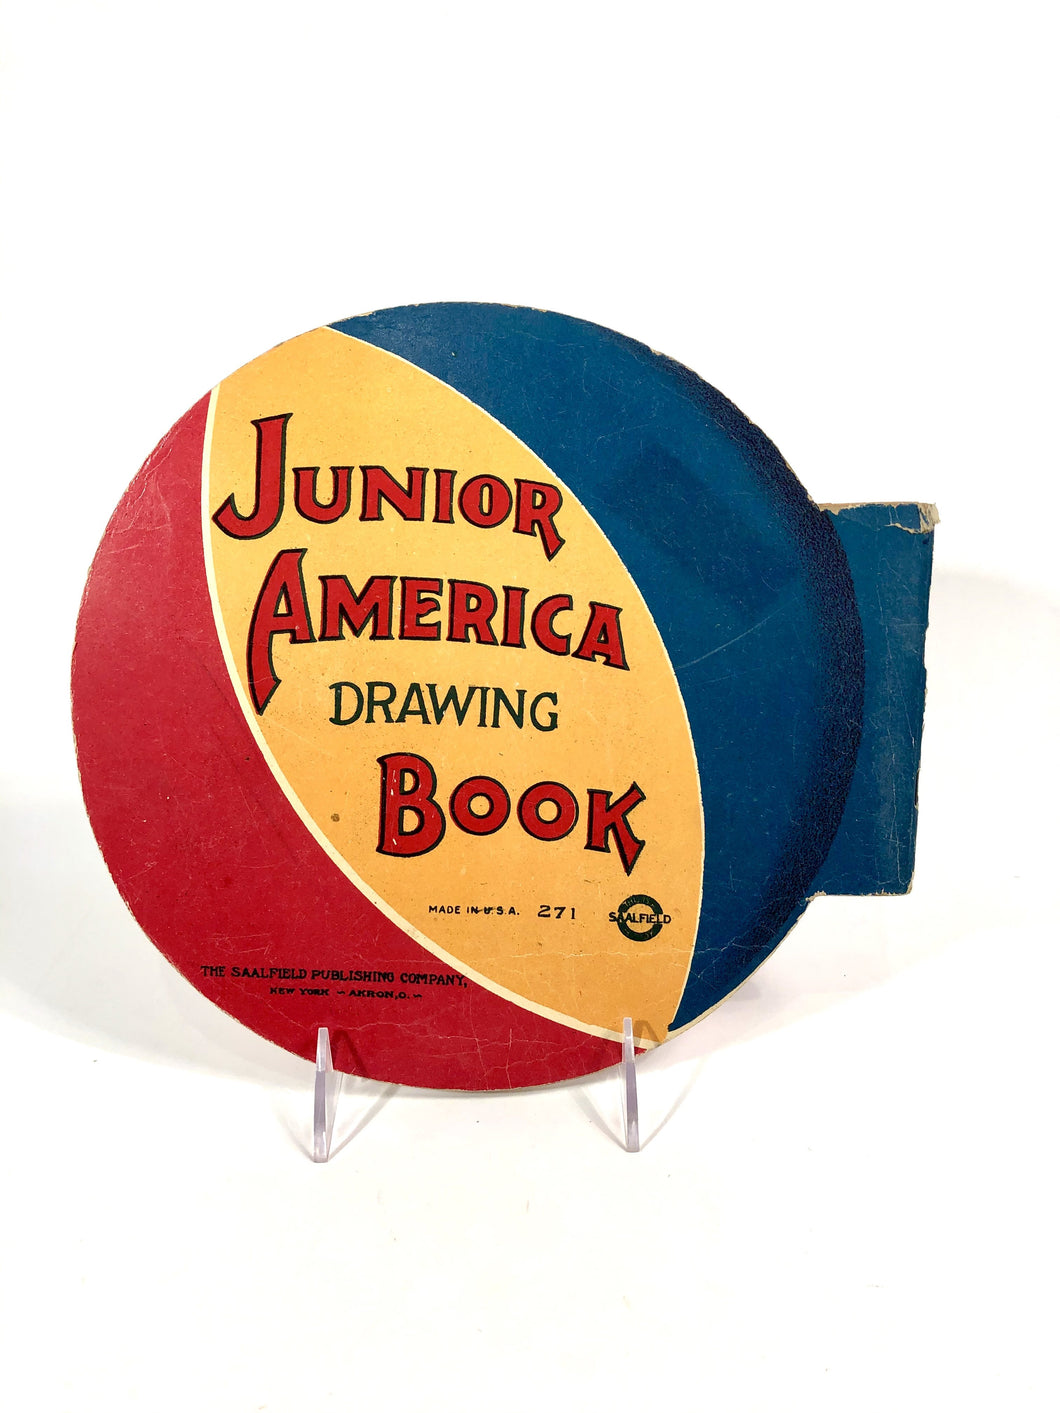 1921 Children's JUNIOR AMERICA DRAWING BOOK, Coloring Book || Saalfield Publishing Co.